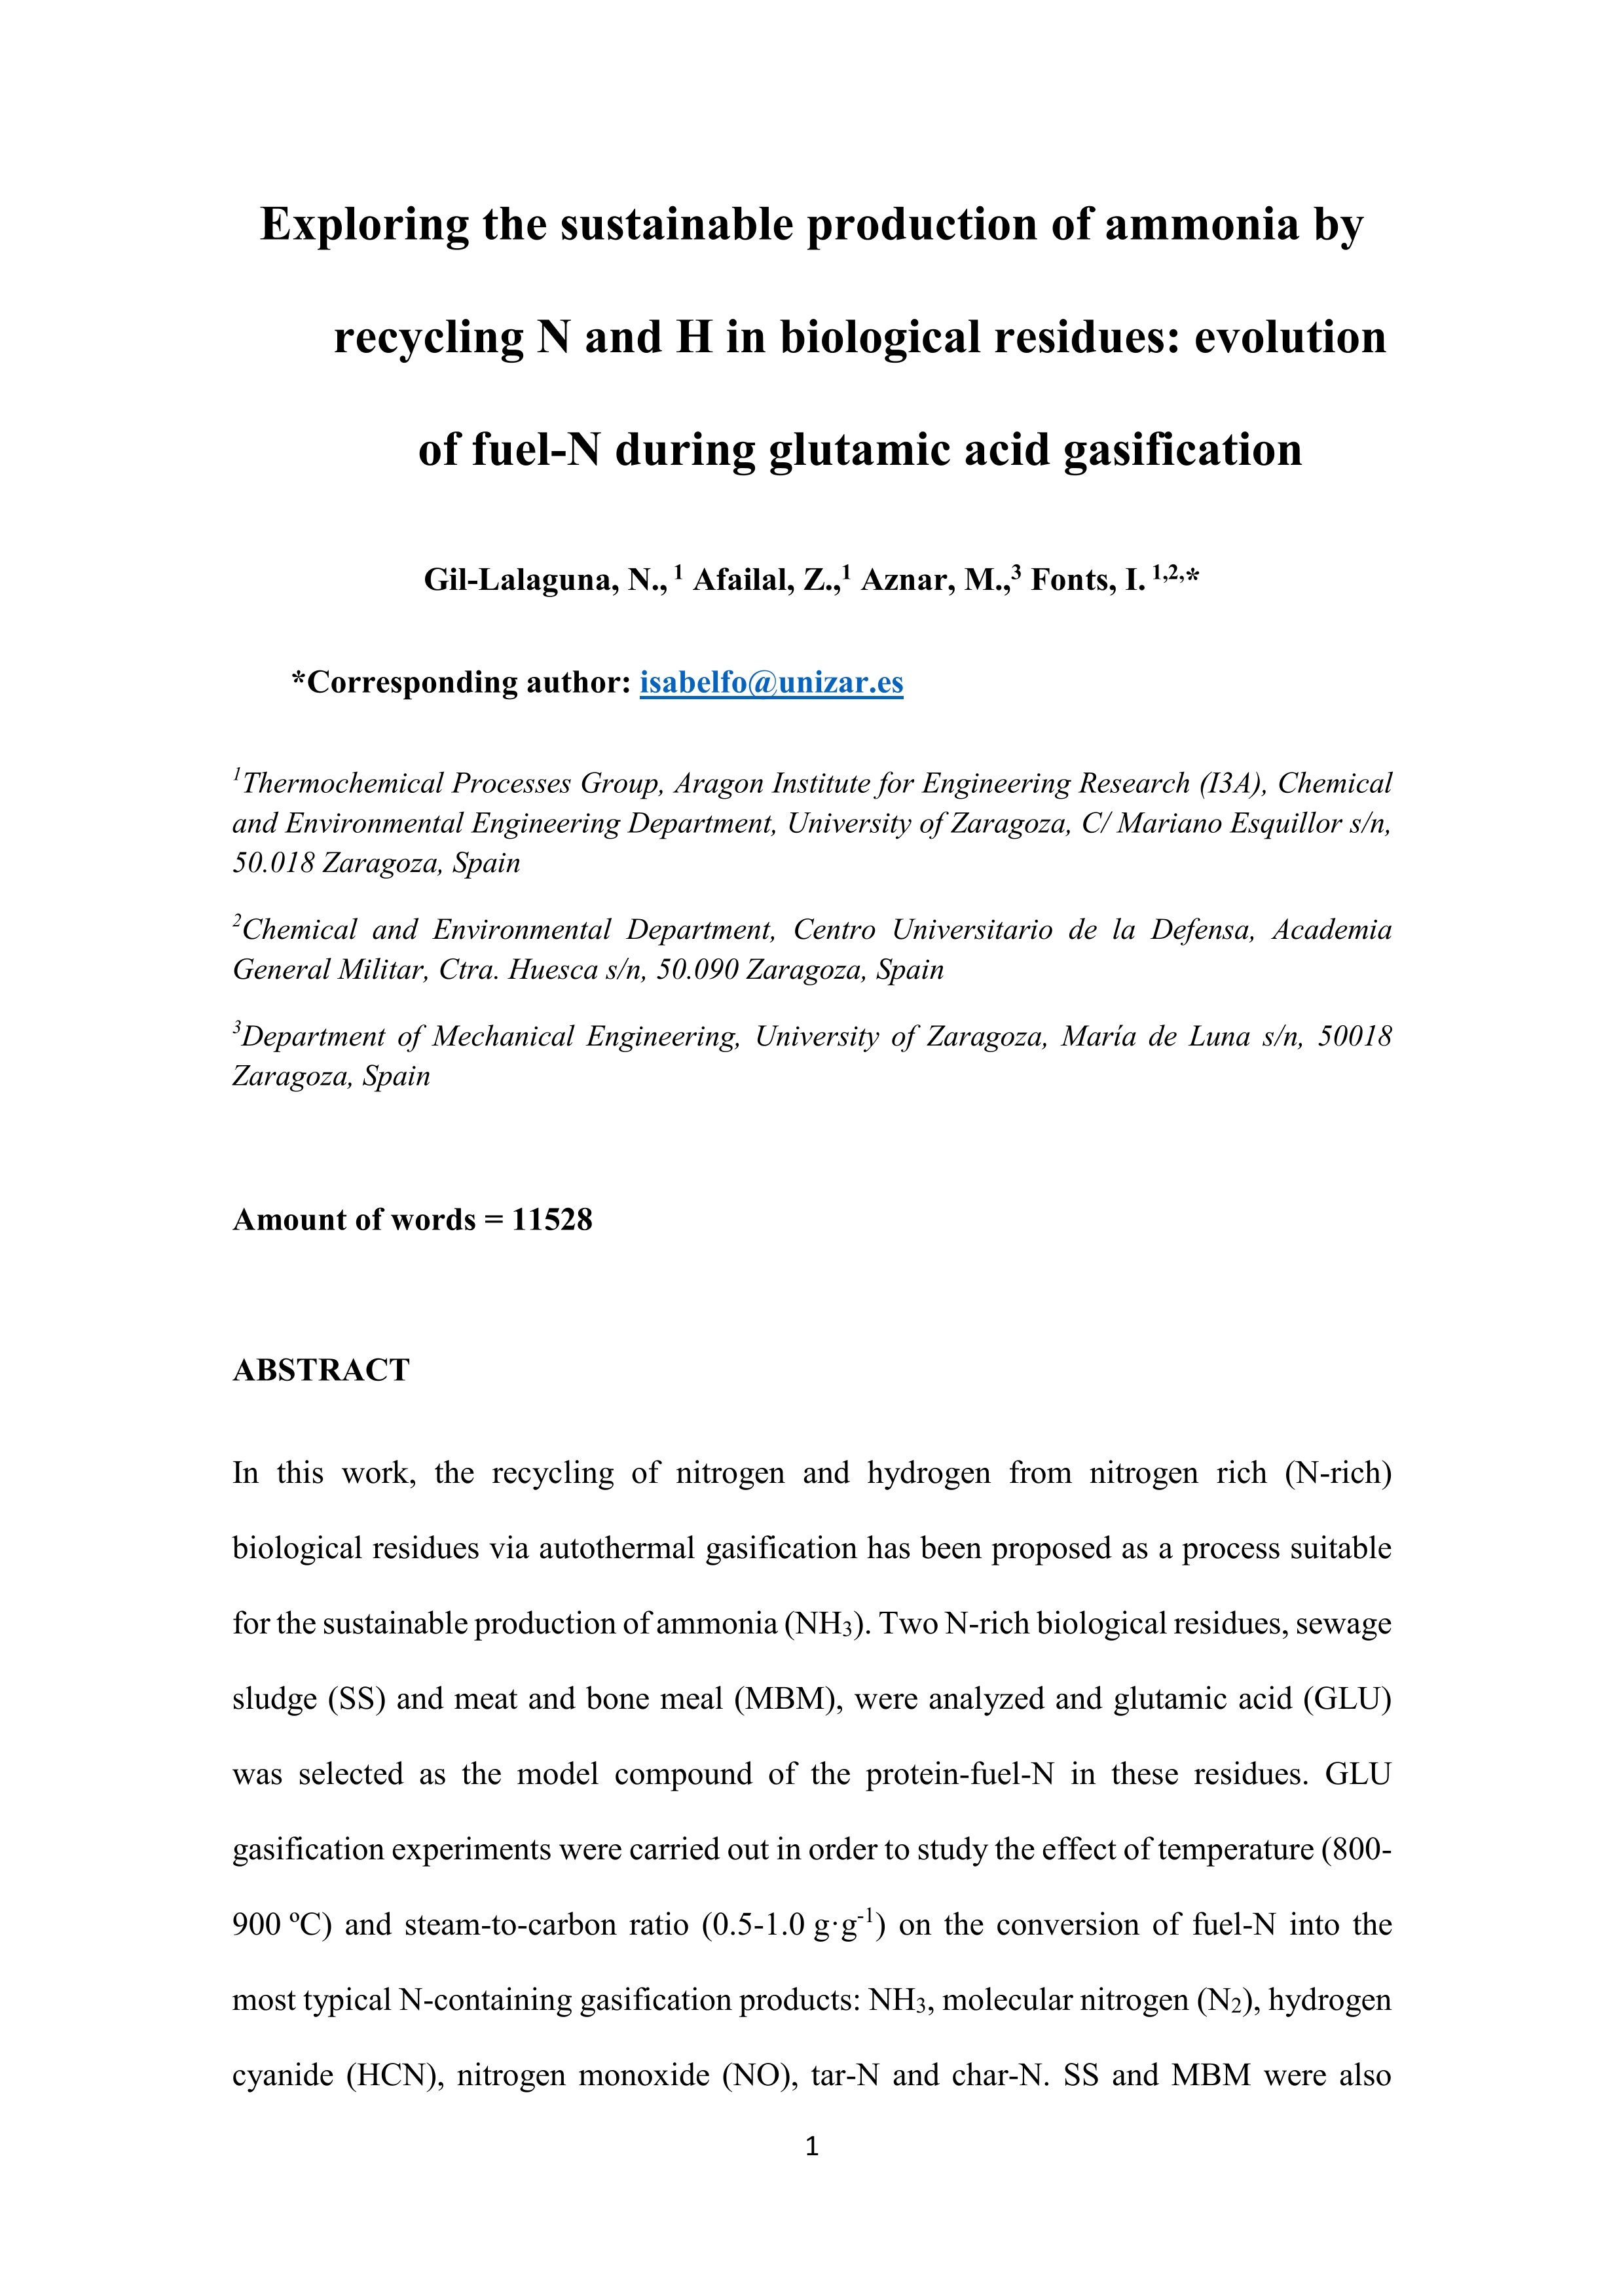 Exploring the sustainable production of ammonia by recycling N and H in biological residues: Evolution of fuel-N during glutamic acid gasification